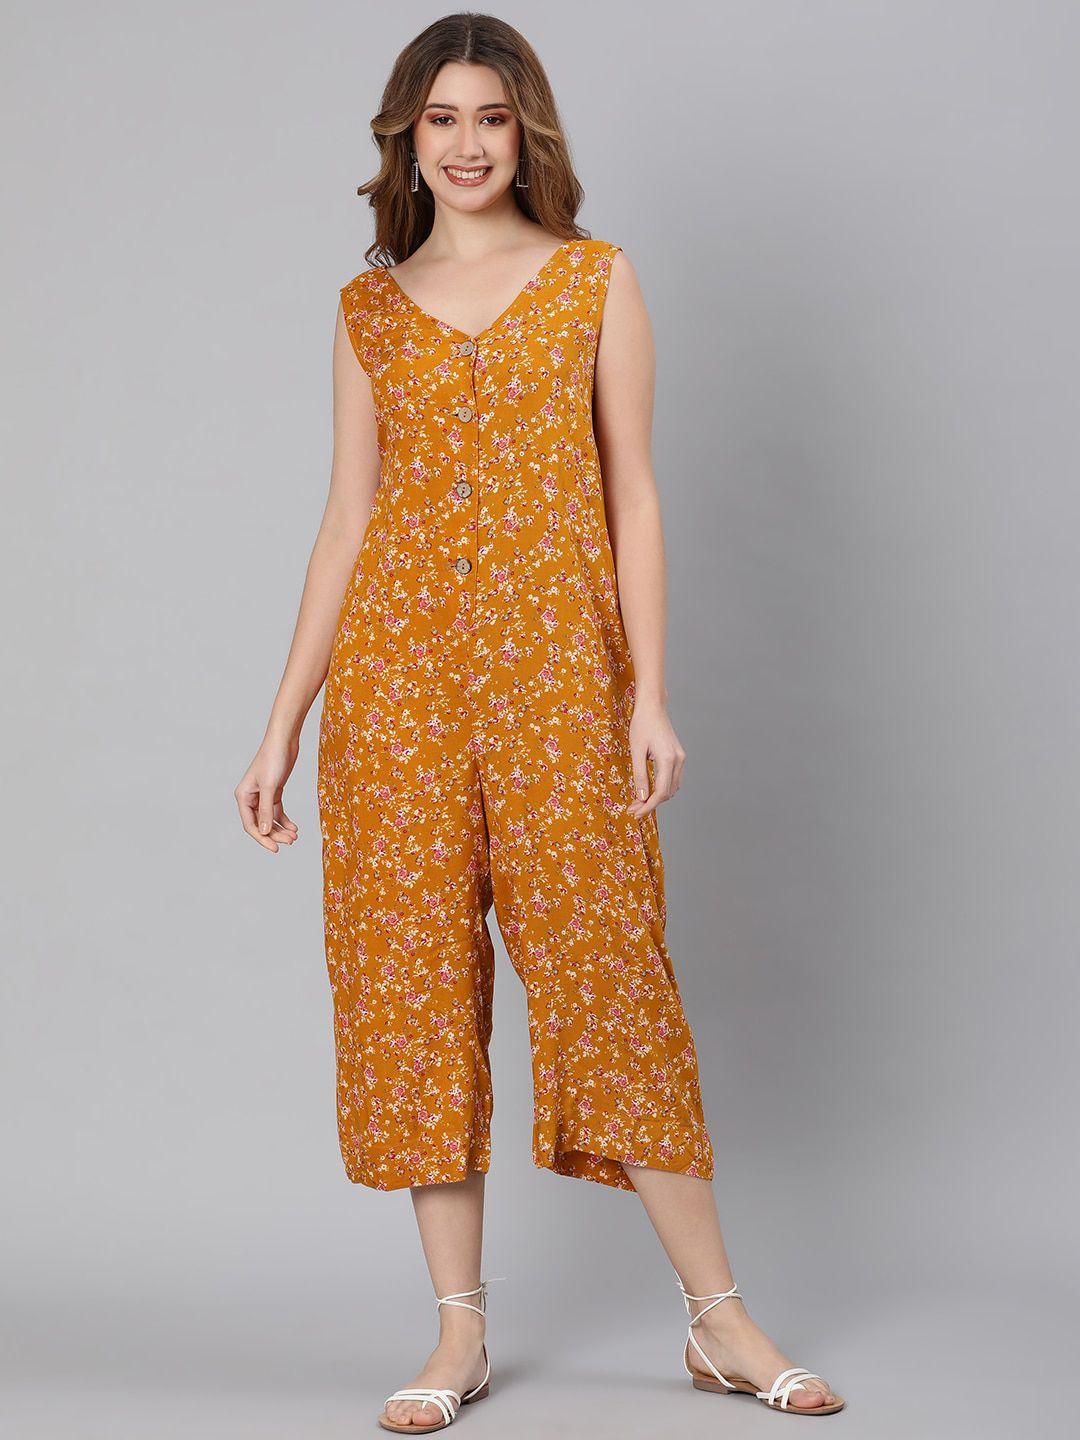 oxolloxo mustard & white floral printed jumpsuit